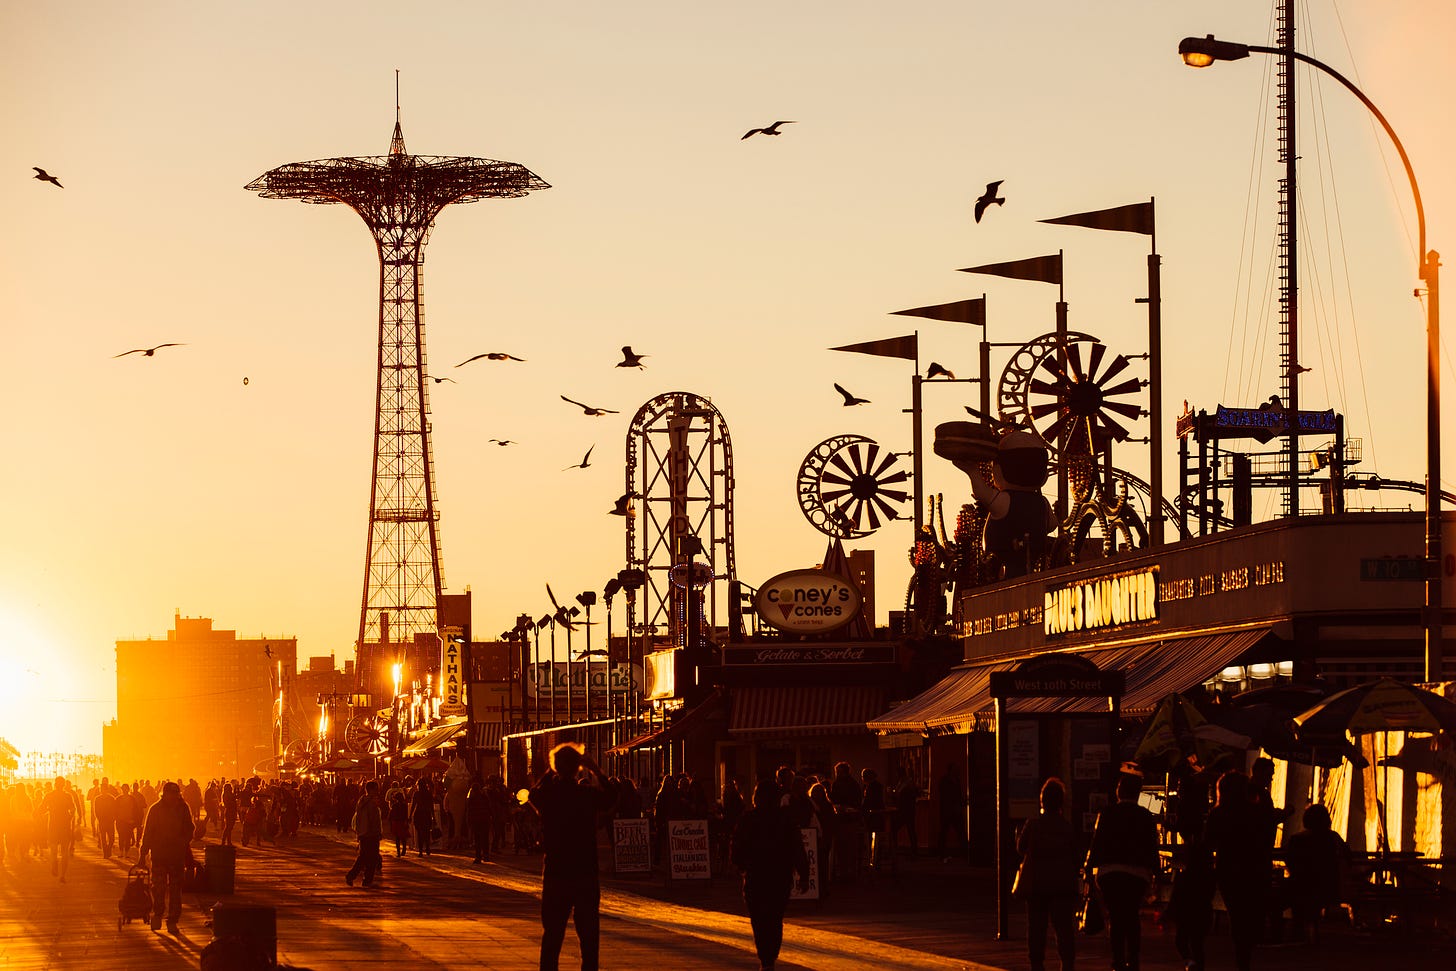 Coney Island at sunset; the image is awash in orange and yellow; people milling about the boardwalk in silhouette; birds flying and the amusements in the near distance.